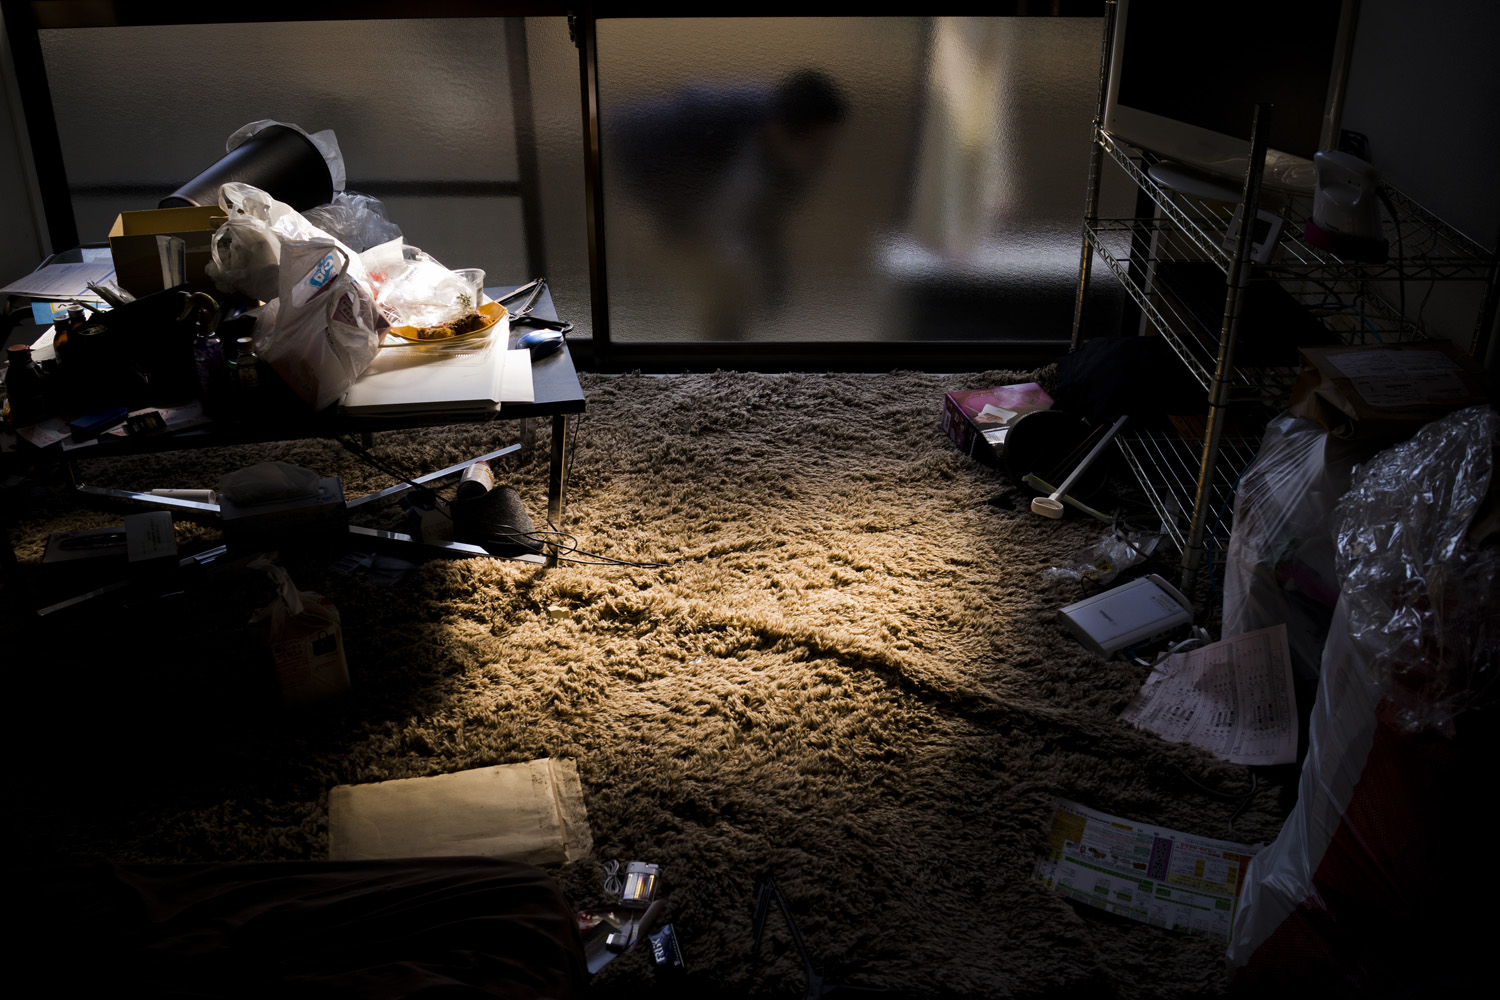 Japan, Fukushima City, 2014Inside the one bedroom apartment after a part time decontamination worker committed suicide by breathing in burning charcoal on the 1st of April shortly after 9pm the night before. His last moments can be retraced with what was left on the floor.